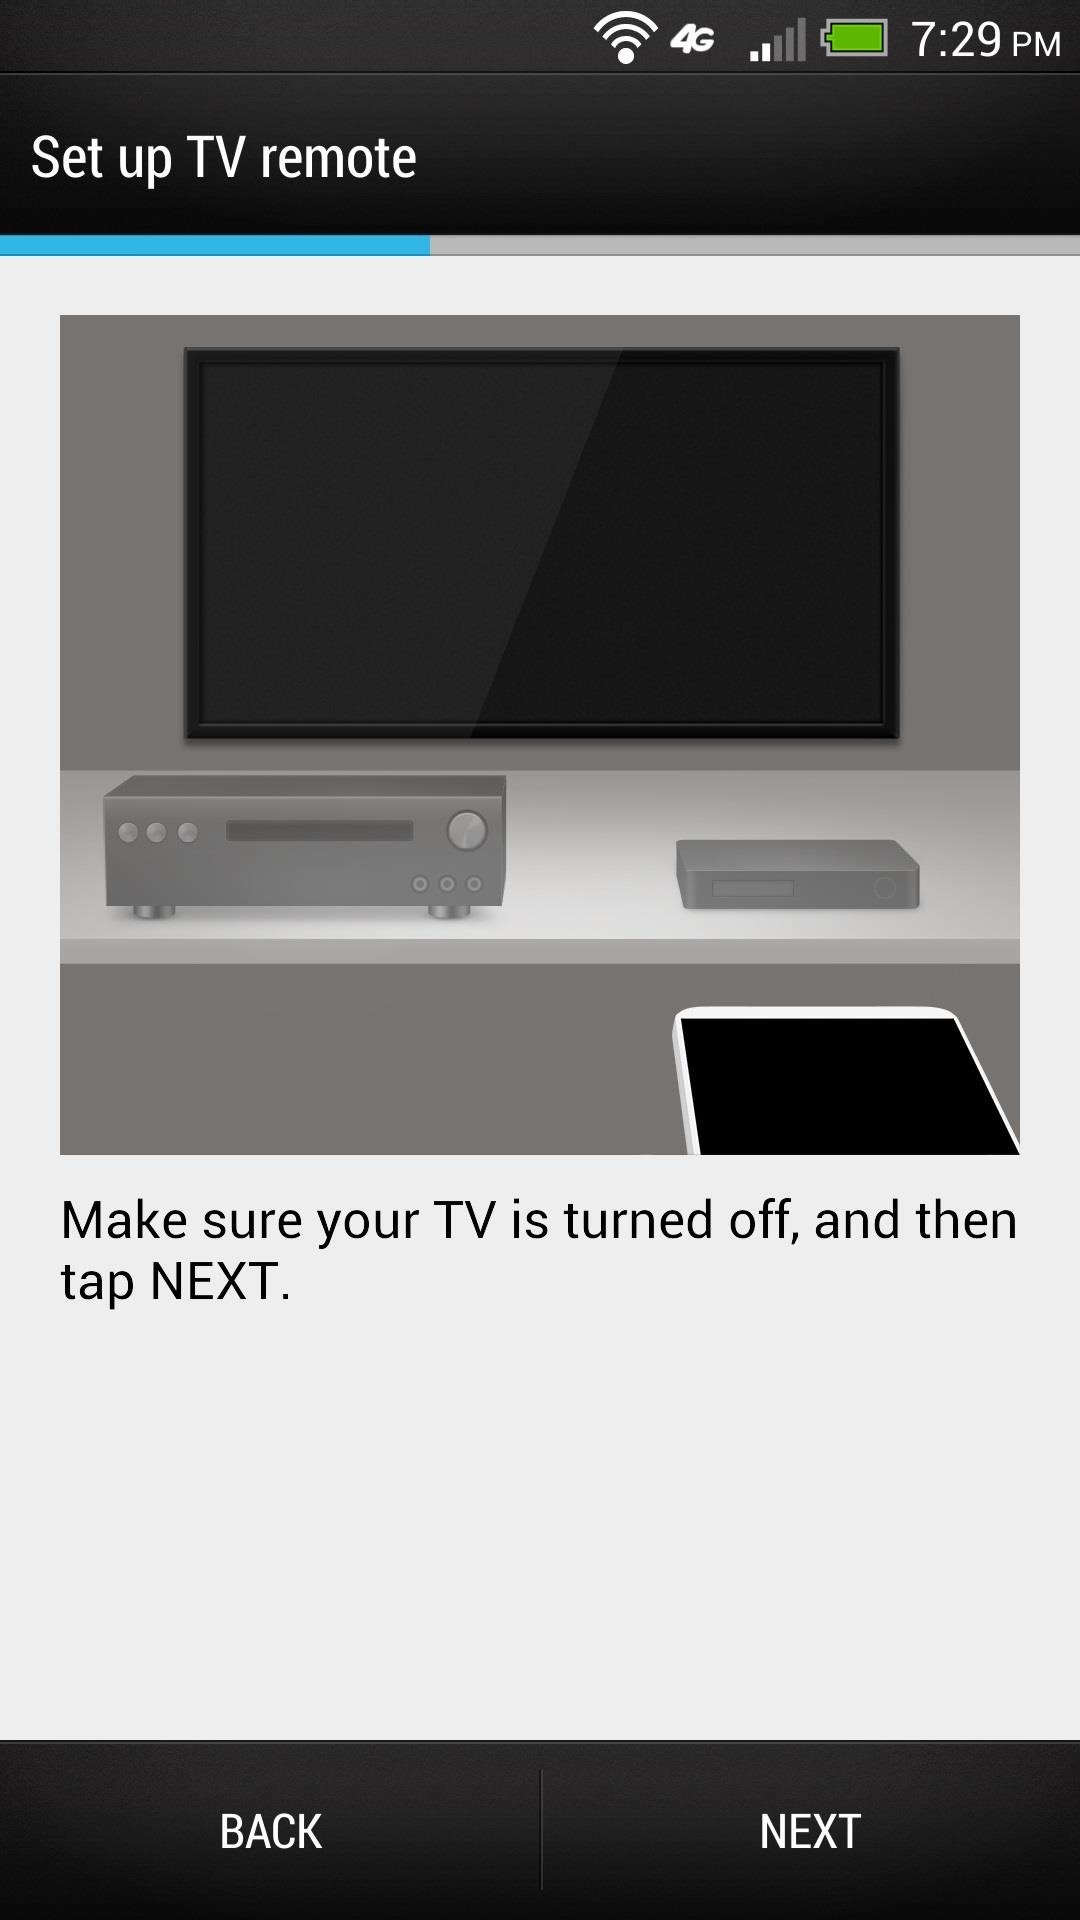 How to Turn Your HTC One into a Remote Control & TV Guide for Your Home Theater System